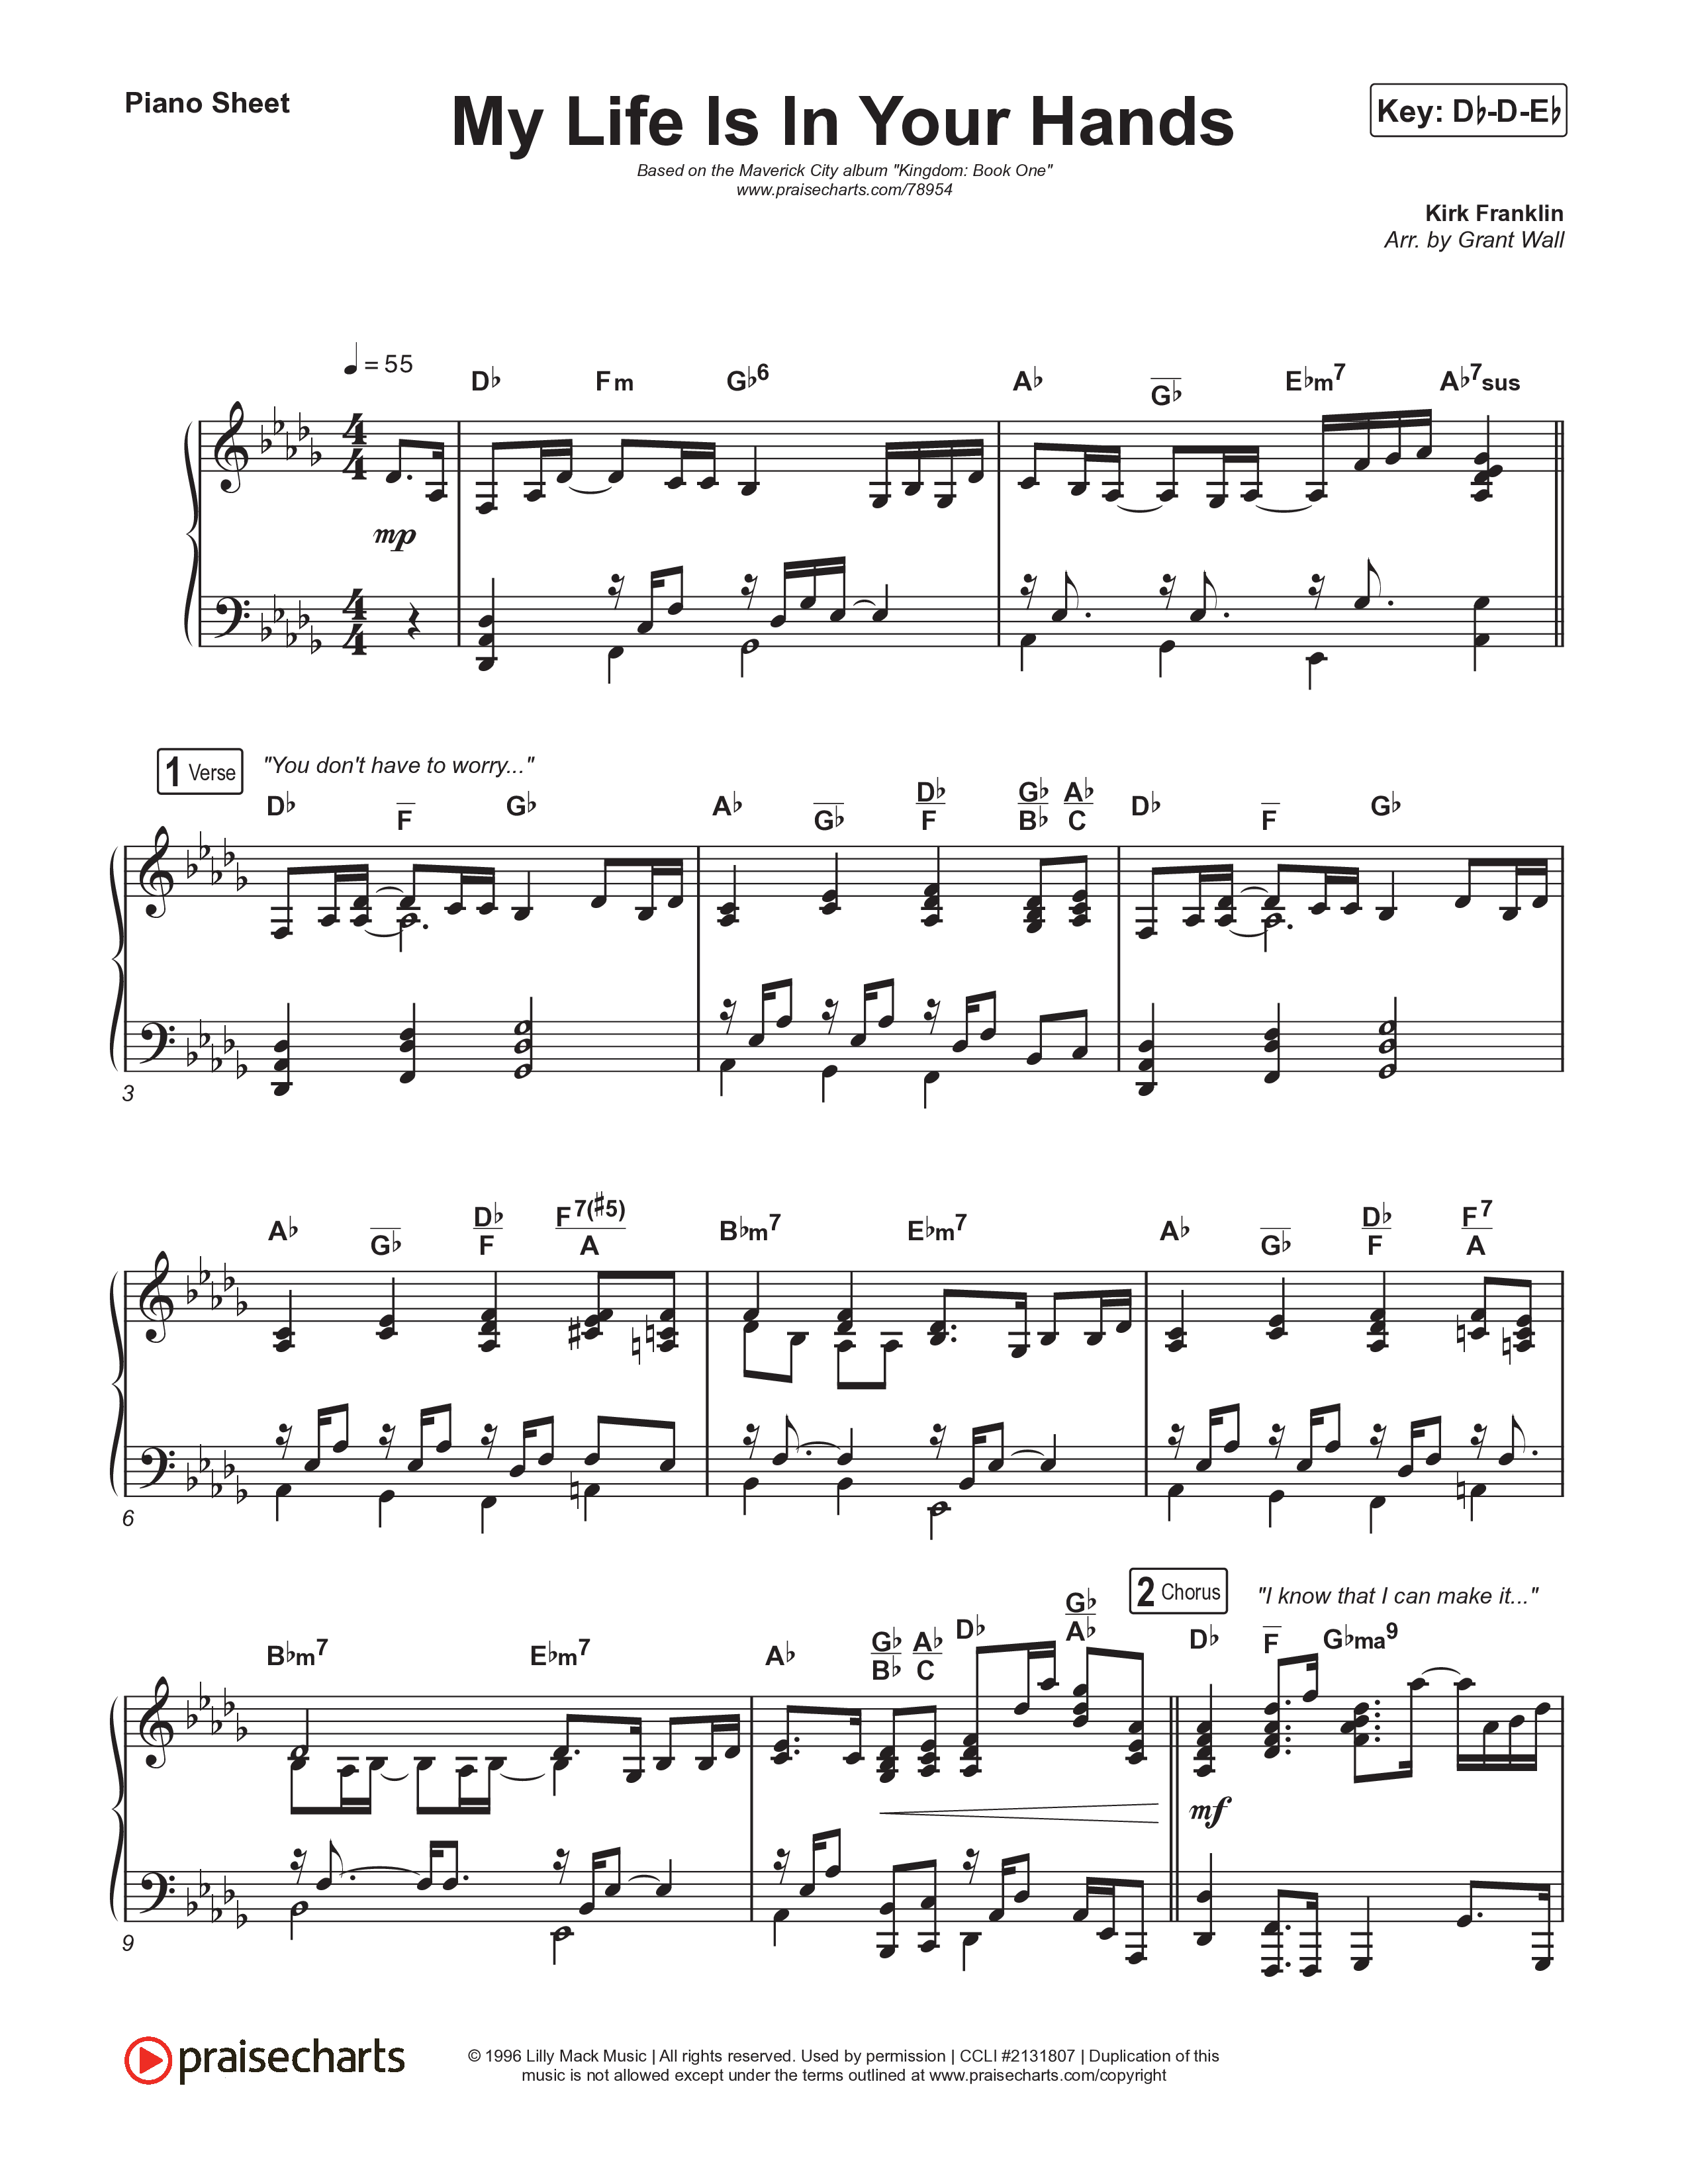 My Life Is In Your Hands (Whole World / Jesus Loves Me) Piano Sheet (Maverick City Music / Kirk Franklin / Chandler Moore)